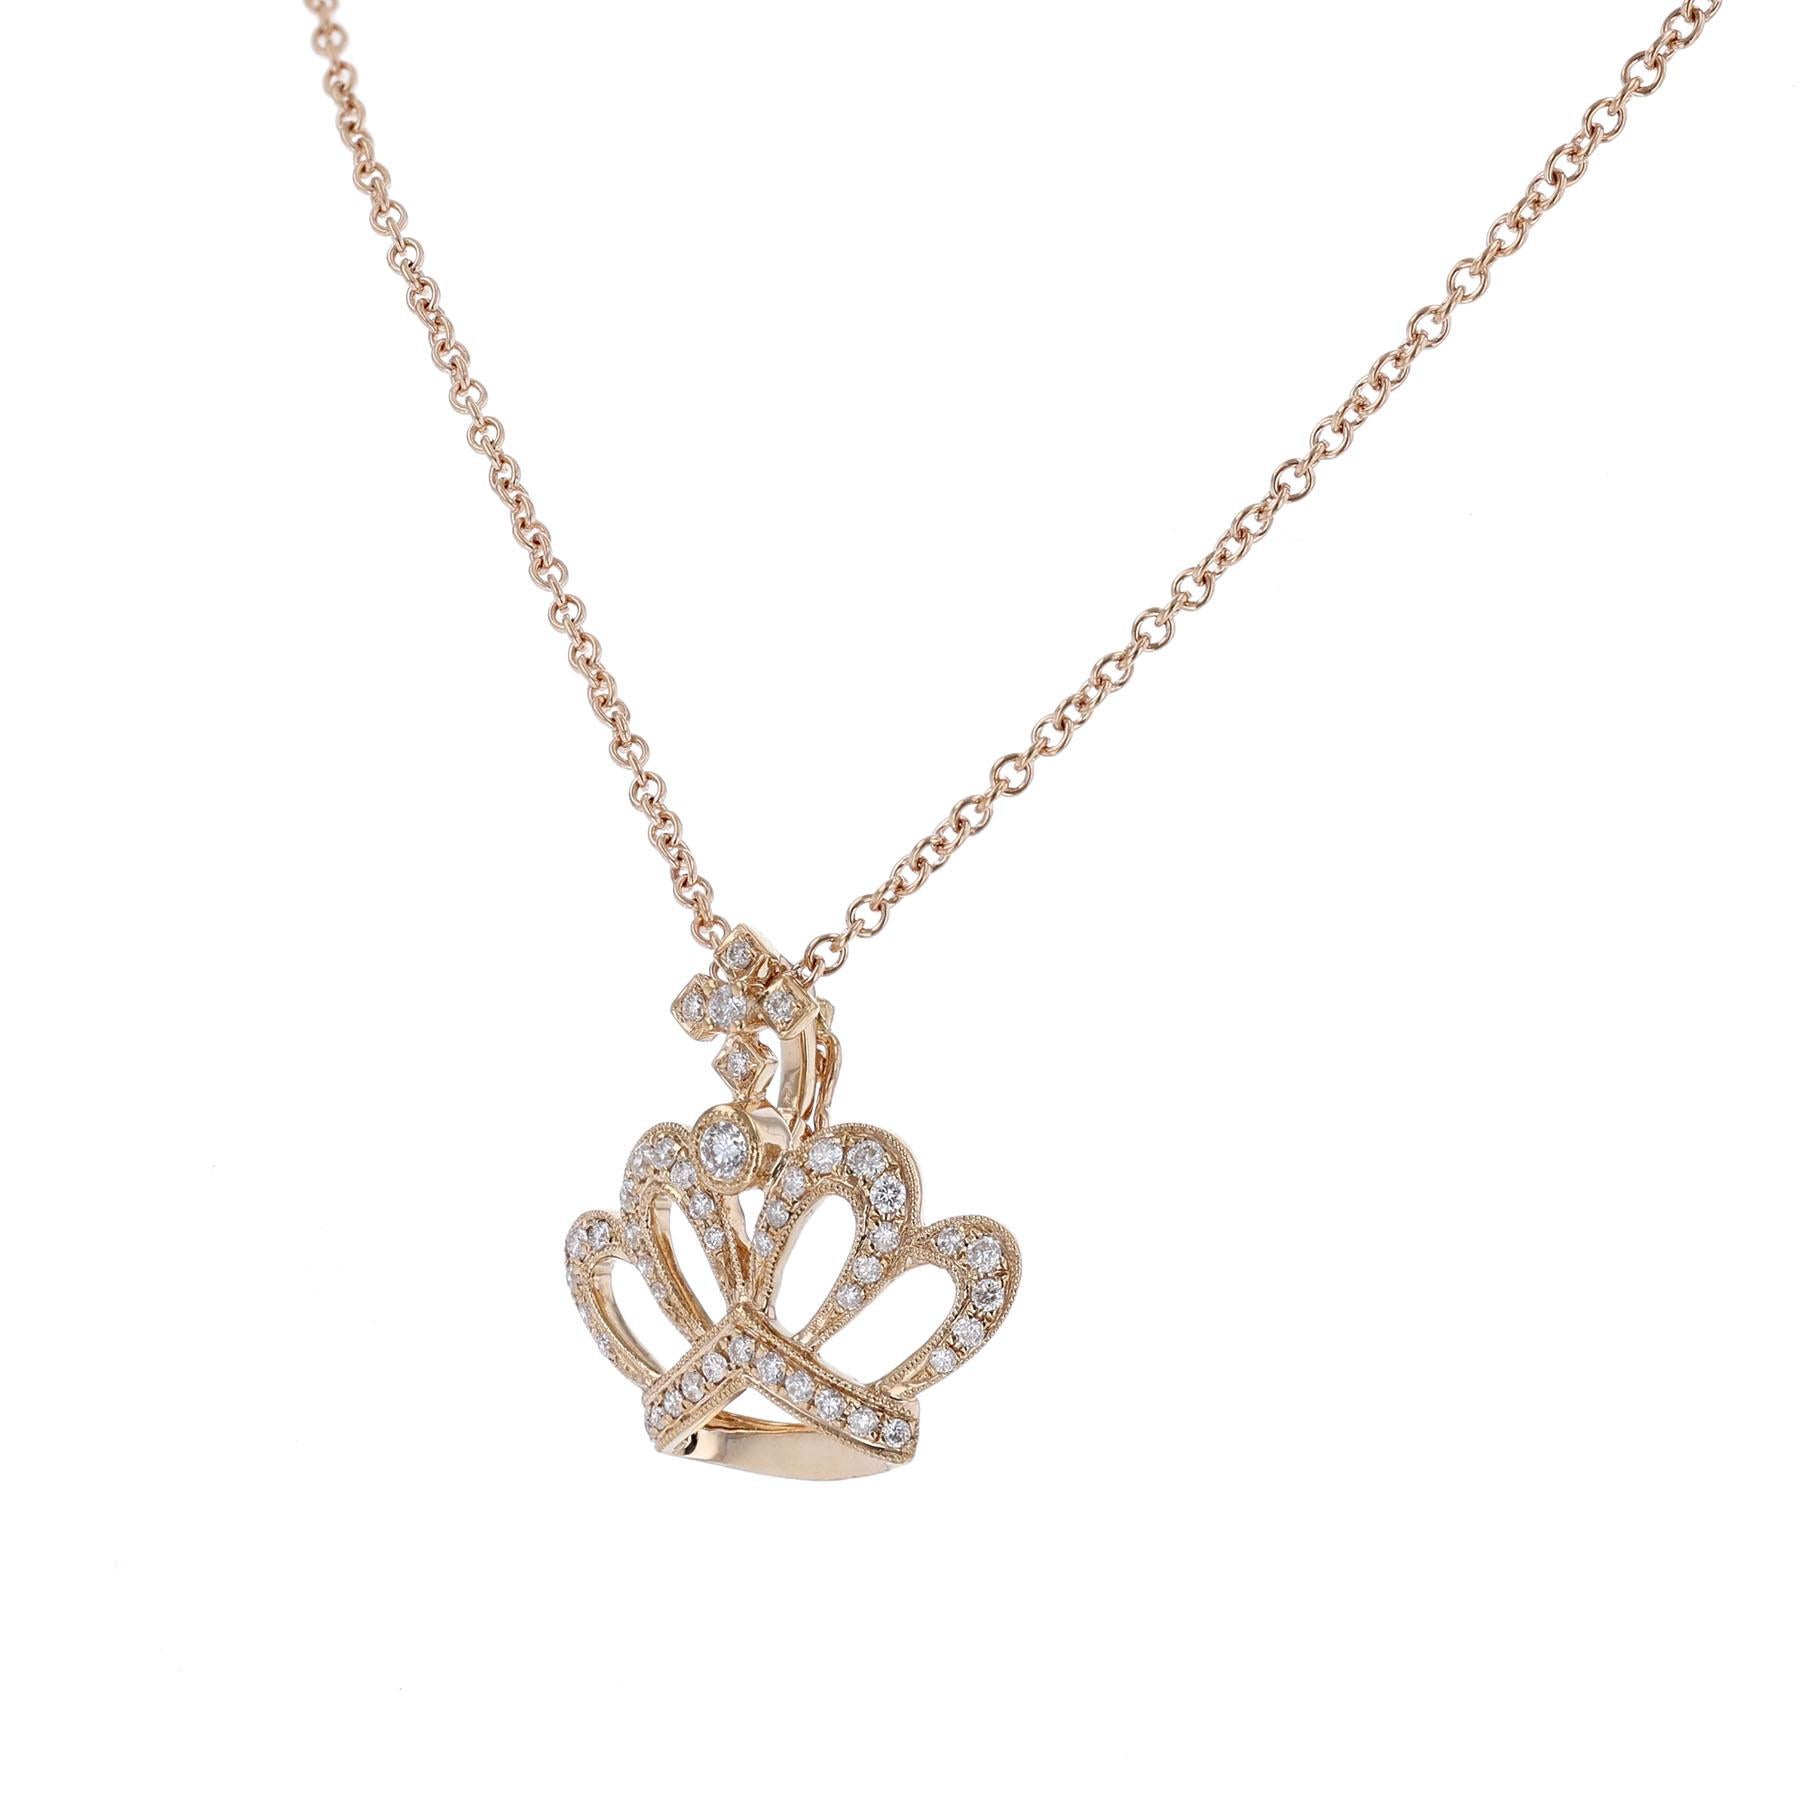 This pendant necklace is made in 18 Karat Rose Gold on a 14K Rose Gold chain. It features crown with a cross pendant of 45 round cut diamonds weighing 0.34 carats. The necklace has a color grade H and clarity grades SI2. 
